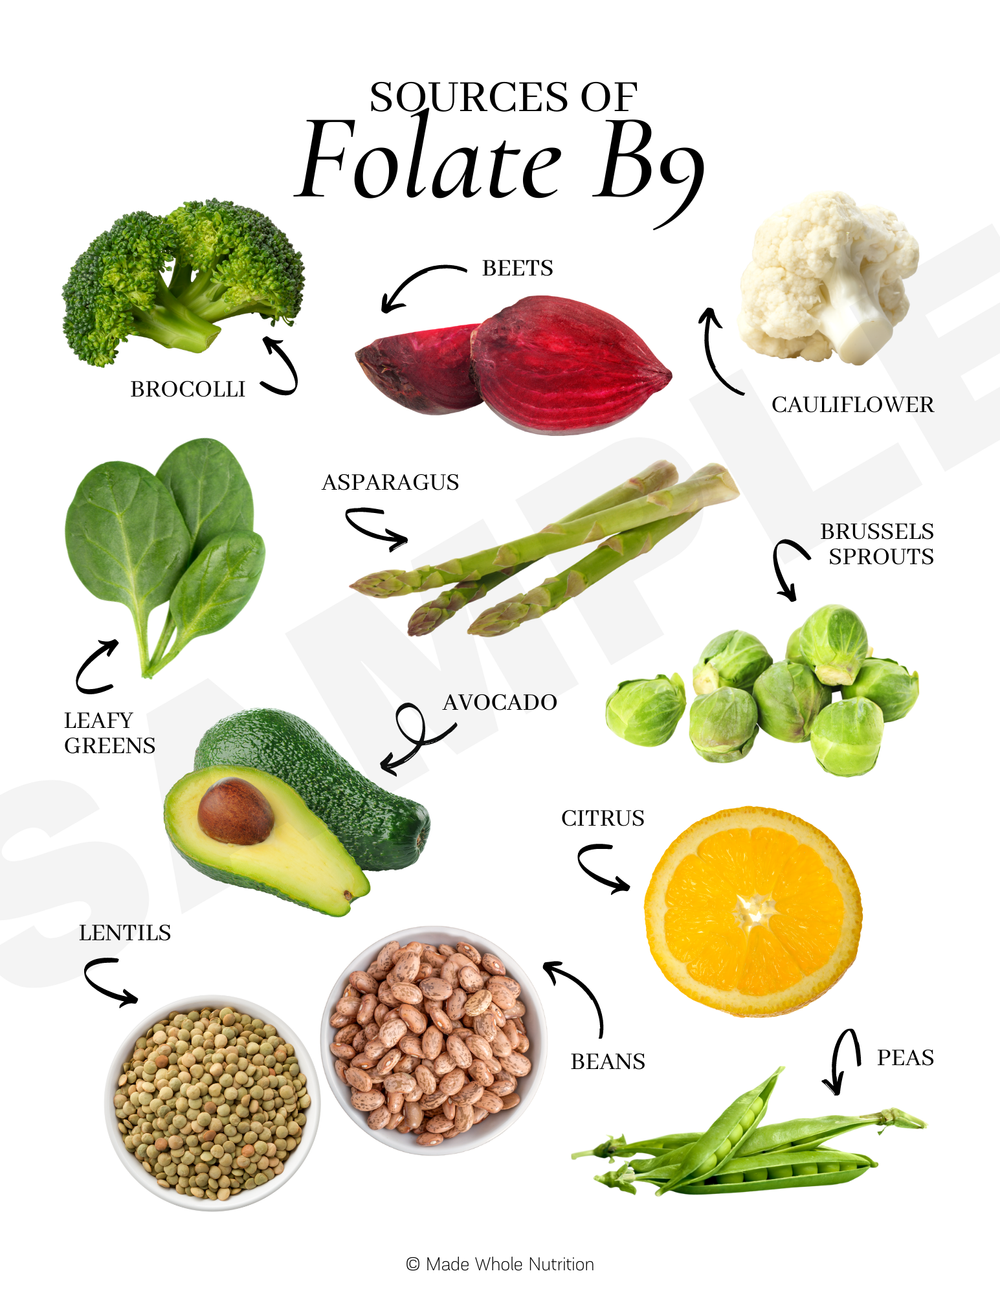 Sources of Folate B9